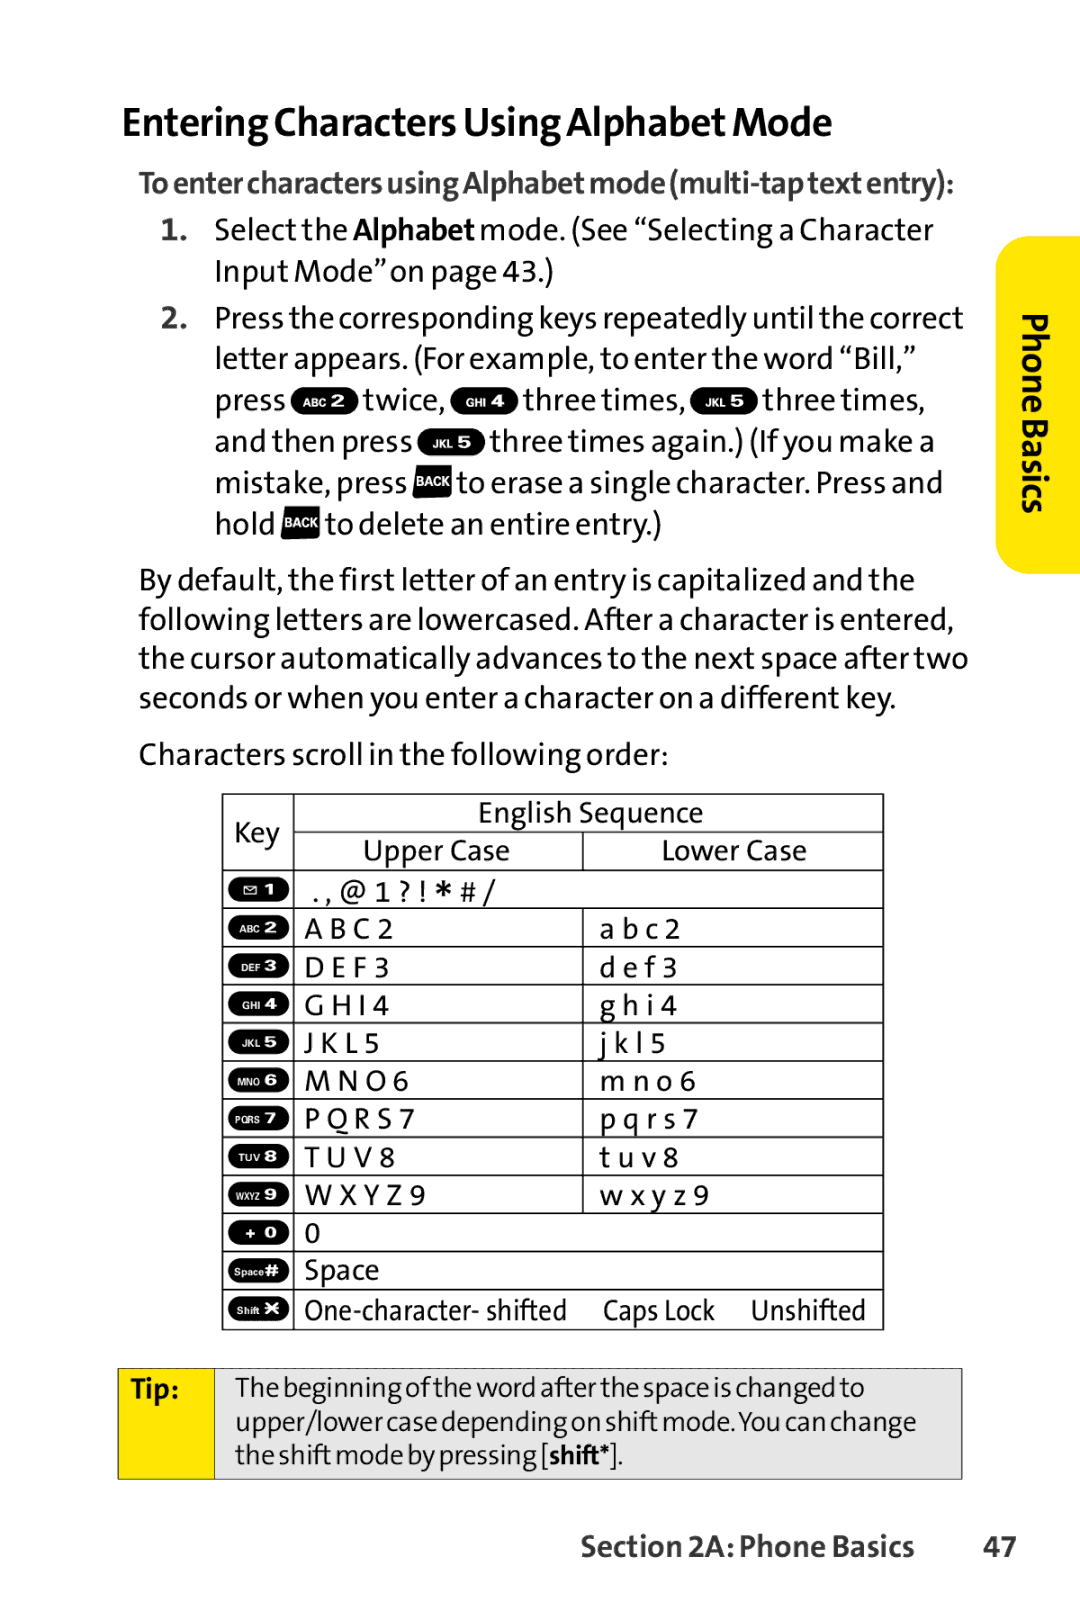 Sprint Nextel SCP-3200 manual Entering Characters Using AlphabetMode 